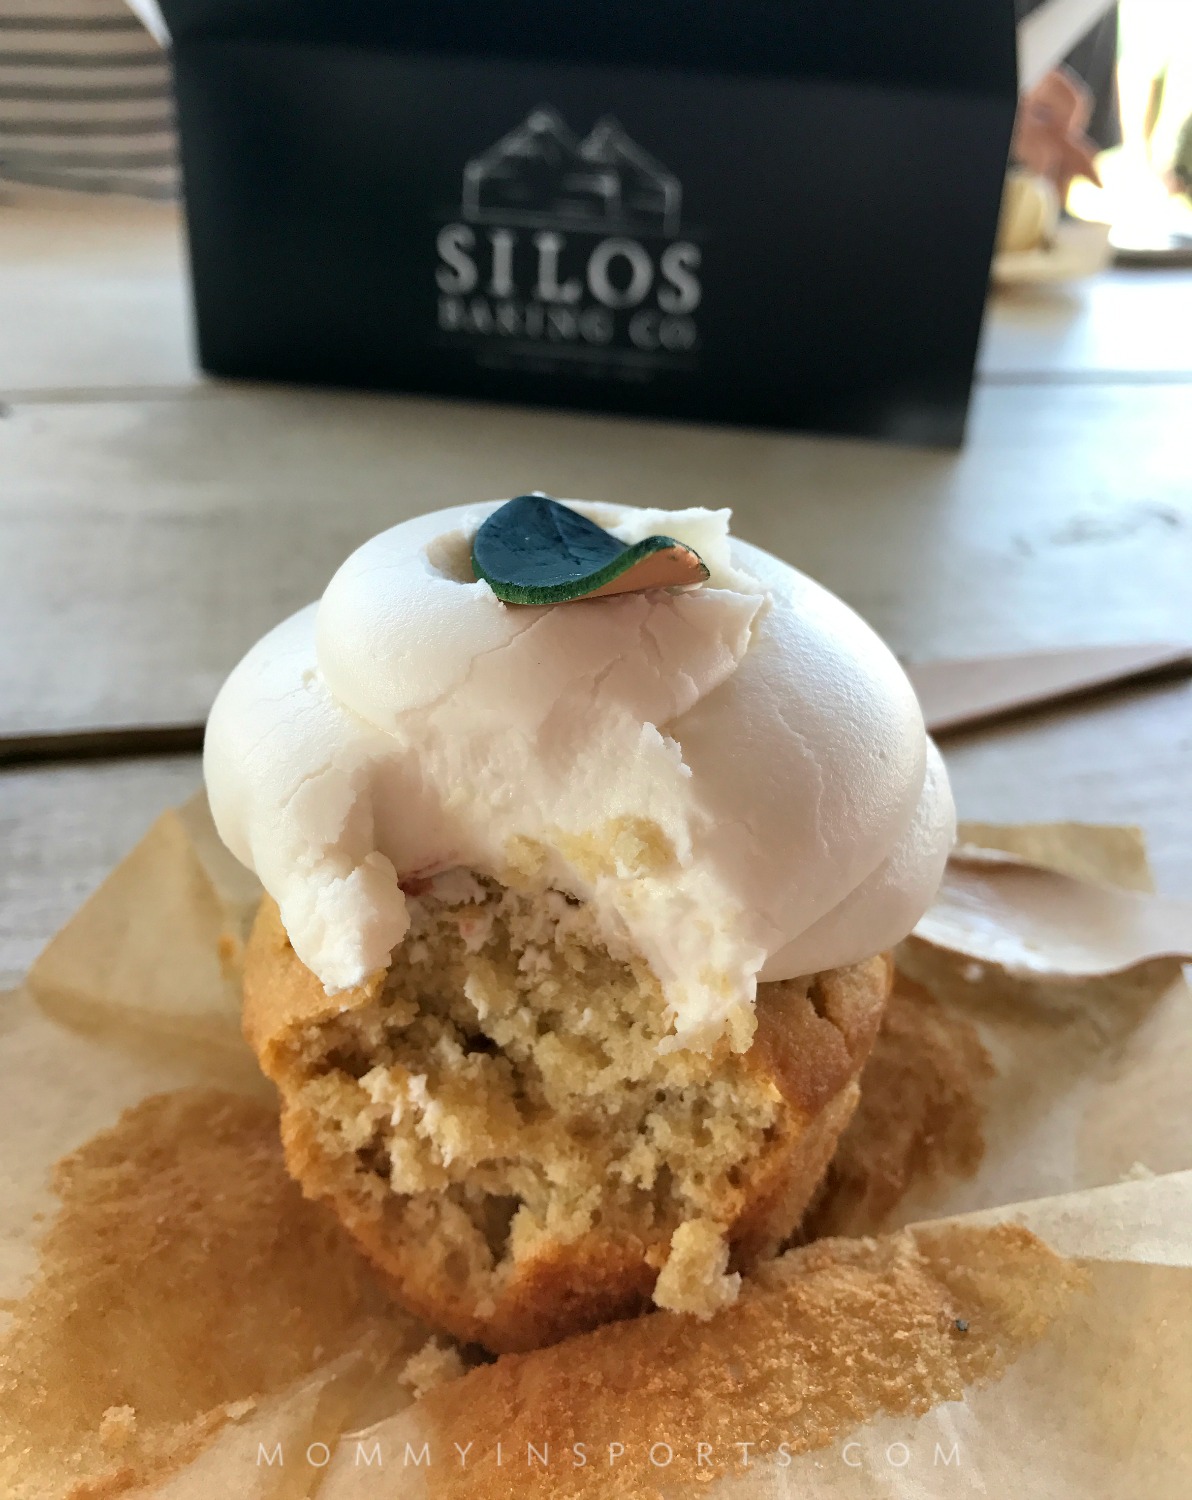 Heading to Waco for a Fixer Upper weekend? No trip is complete without a stop at Silos Baking Co. at Magnolia. Here's some tips to get you in and out quick!